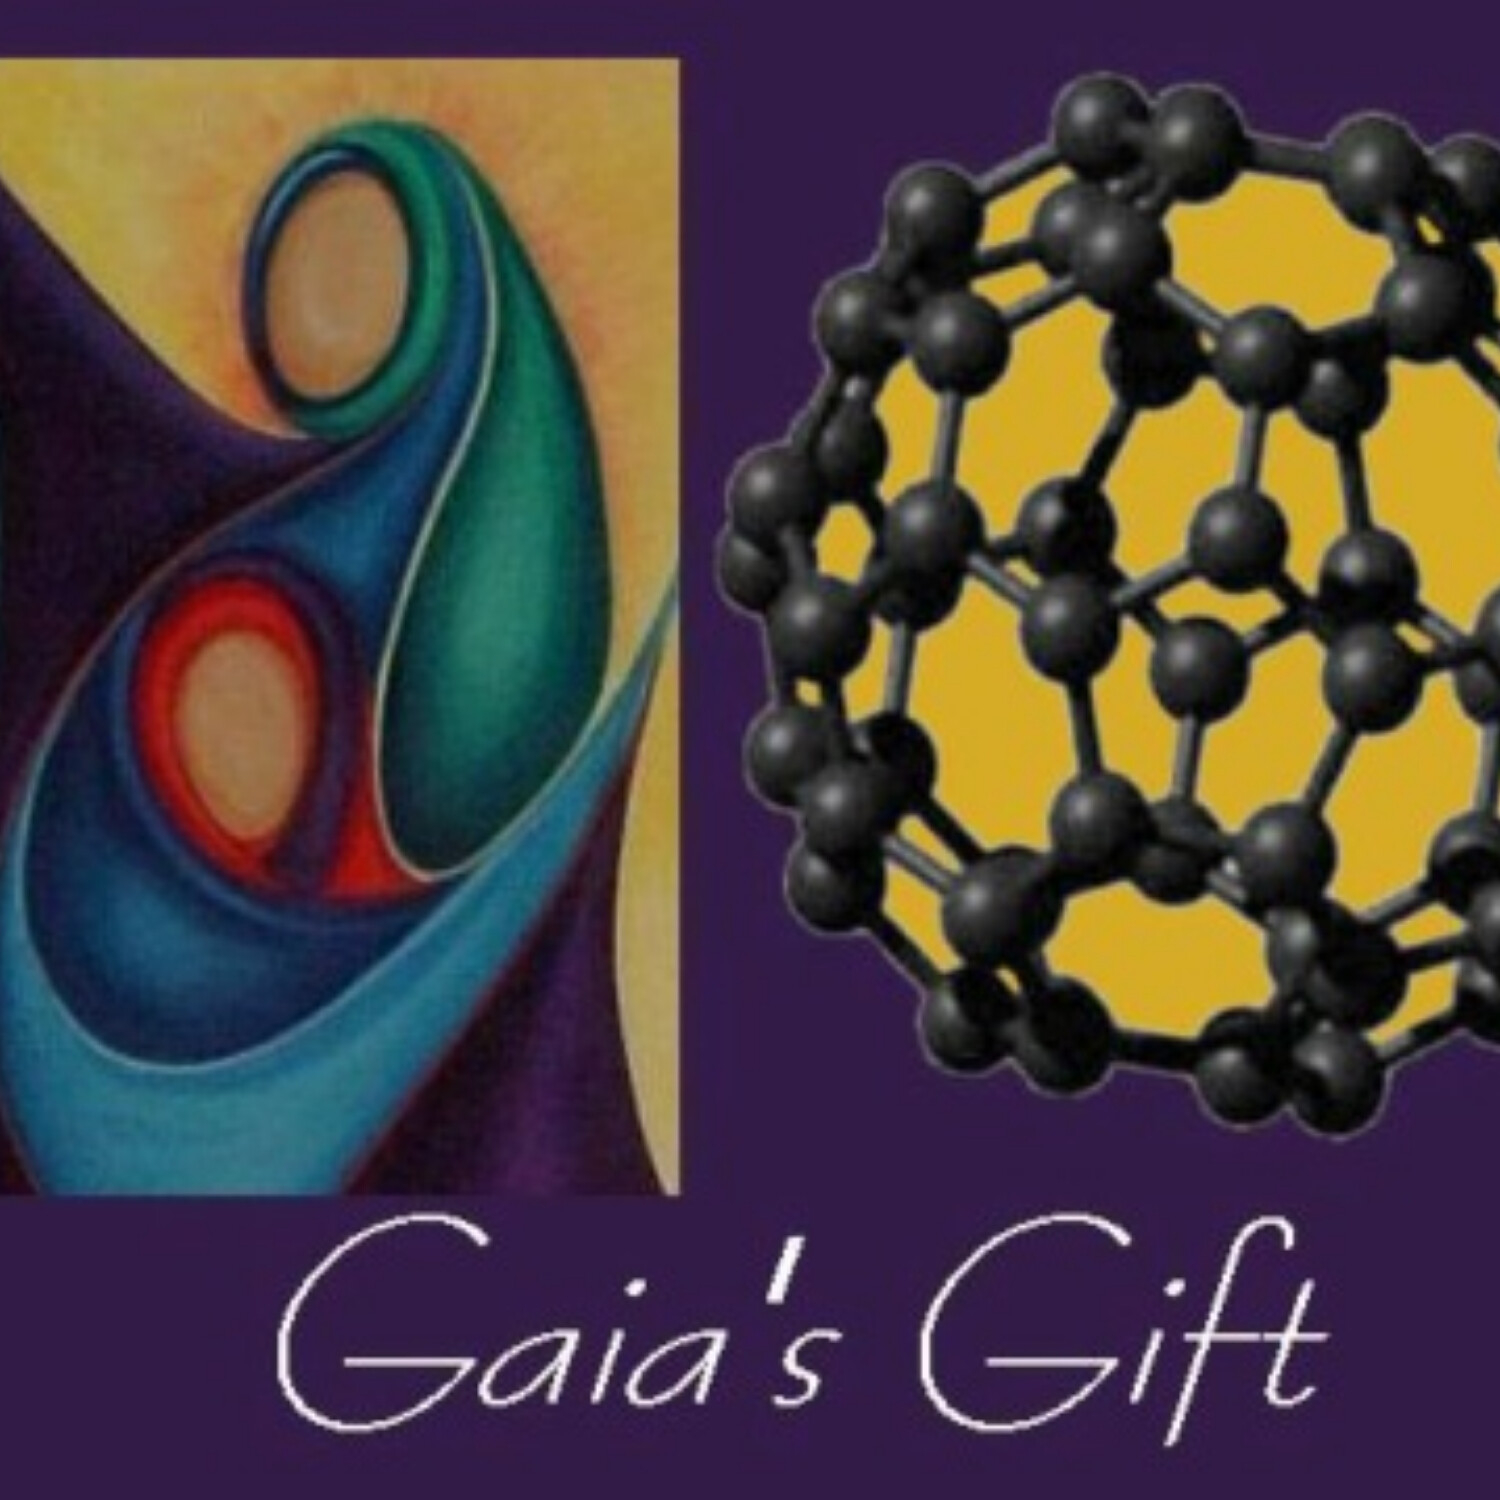 Gaia's Gift Newsletter #3 - The Science of Shungite Energized Water